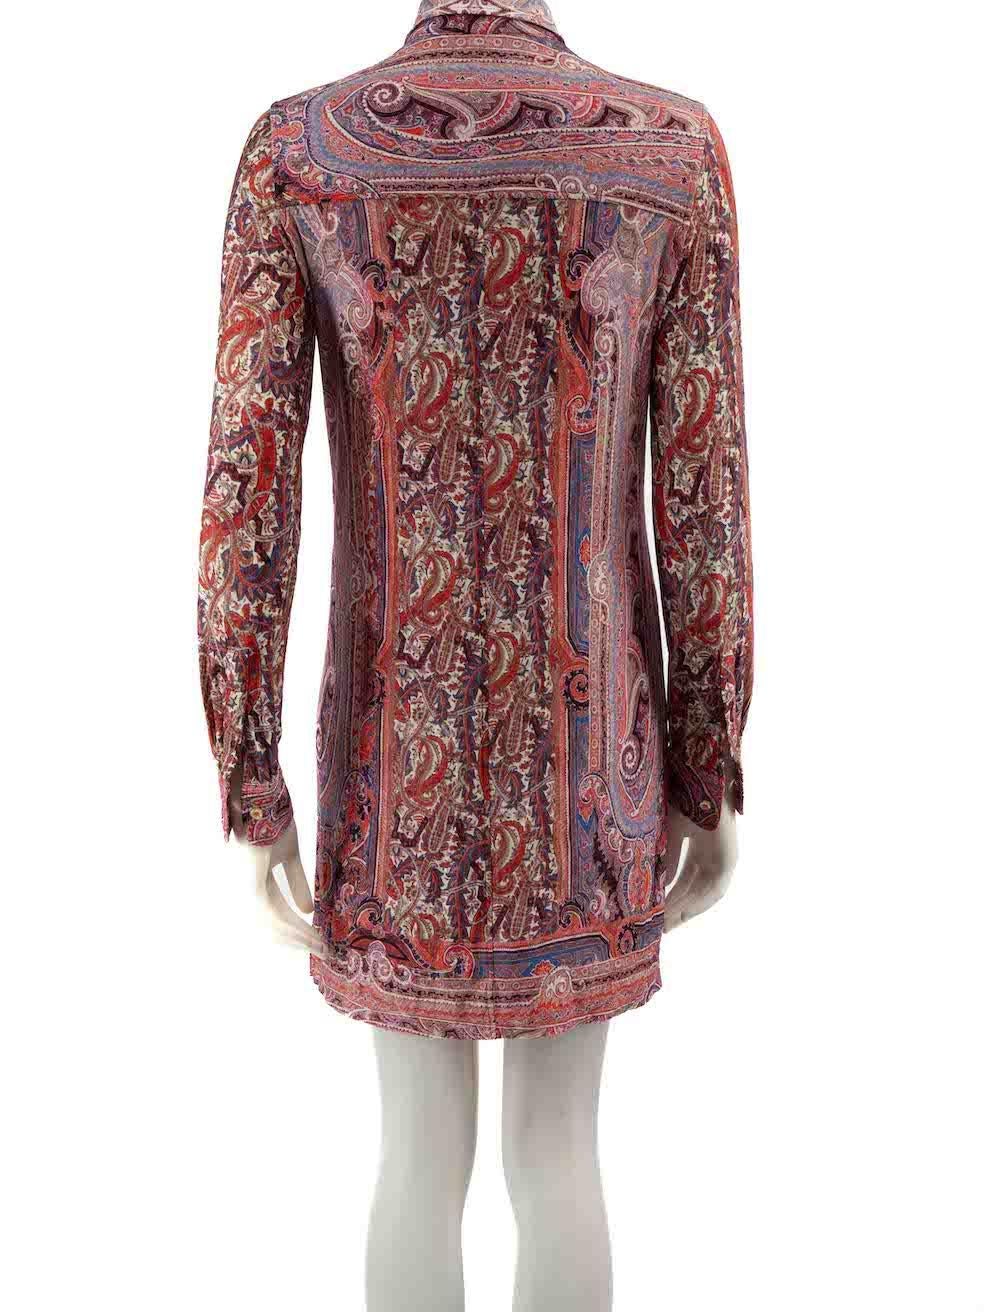 Isabel Marant Pink Tilda Paisley Print Dress Size XL In Good Condition For Sale In London, GB